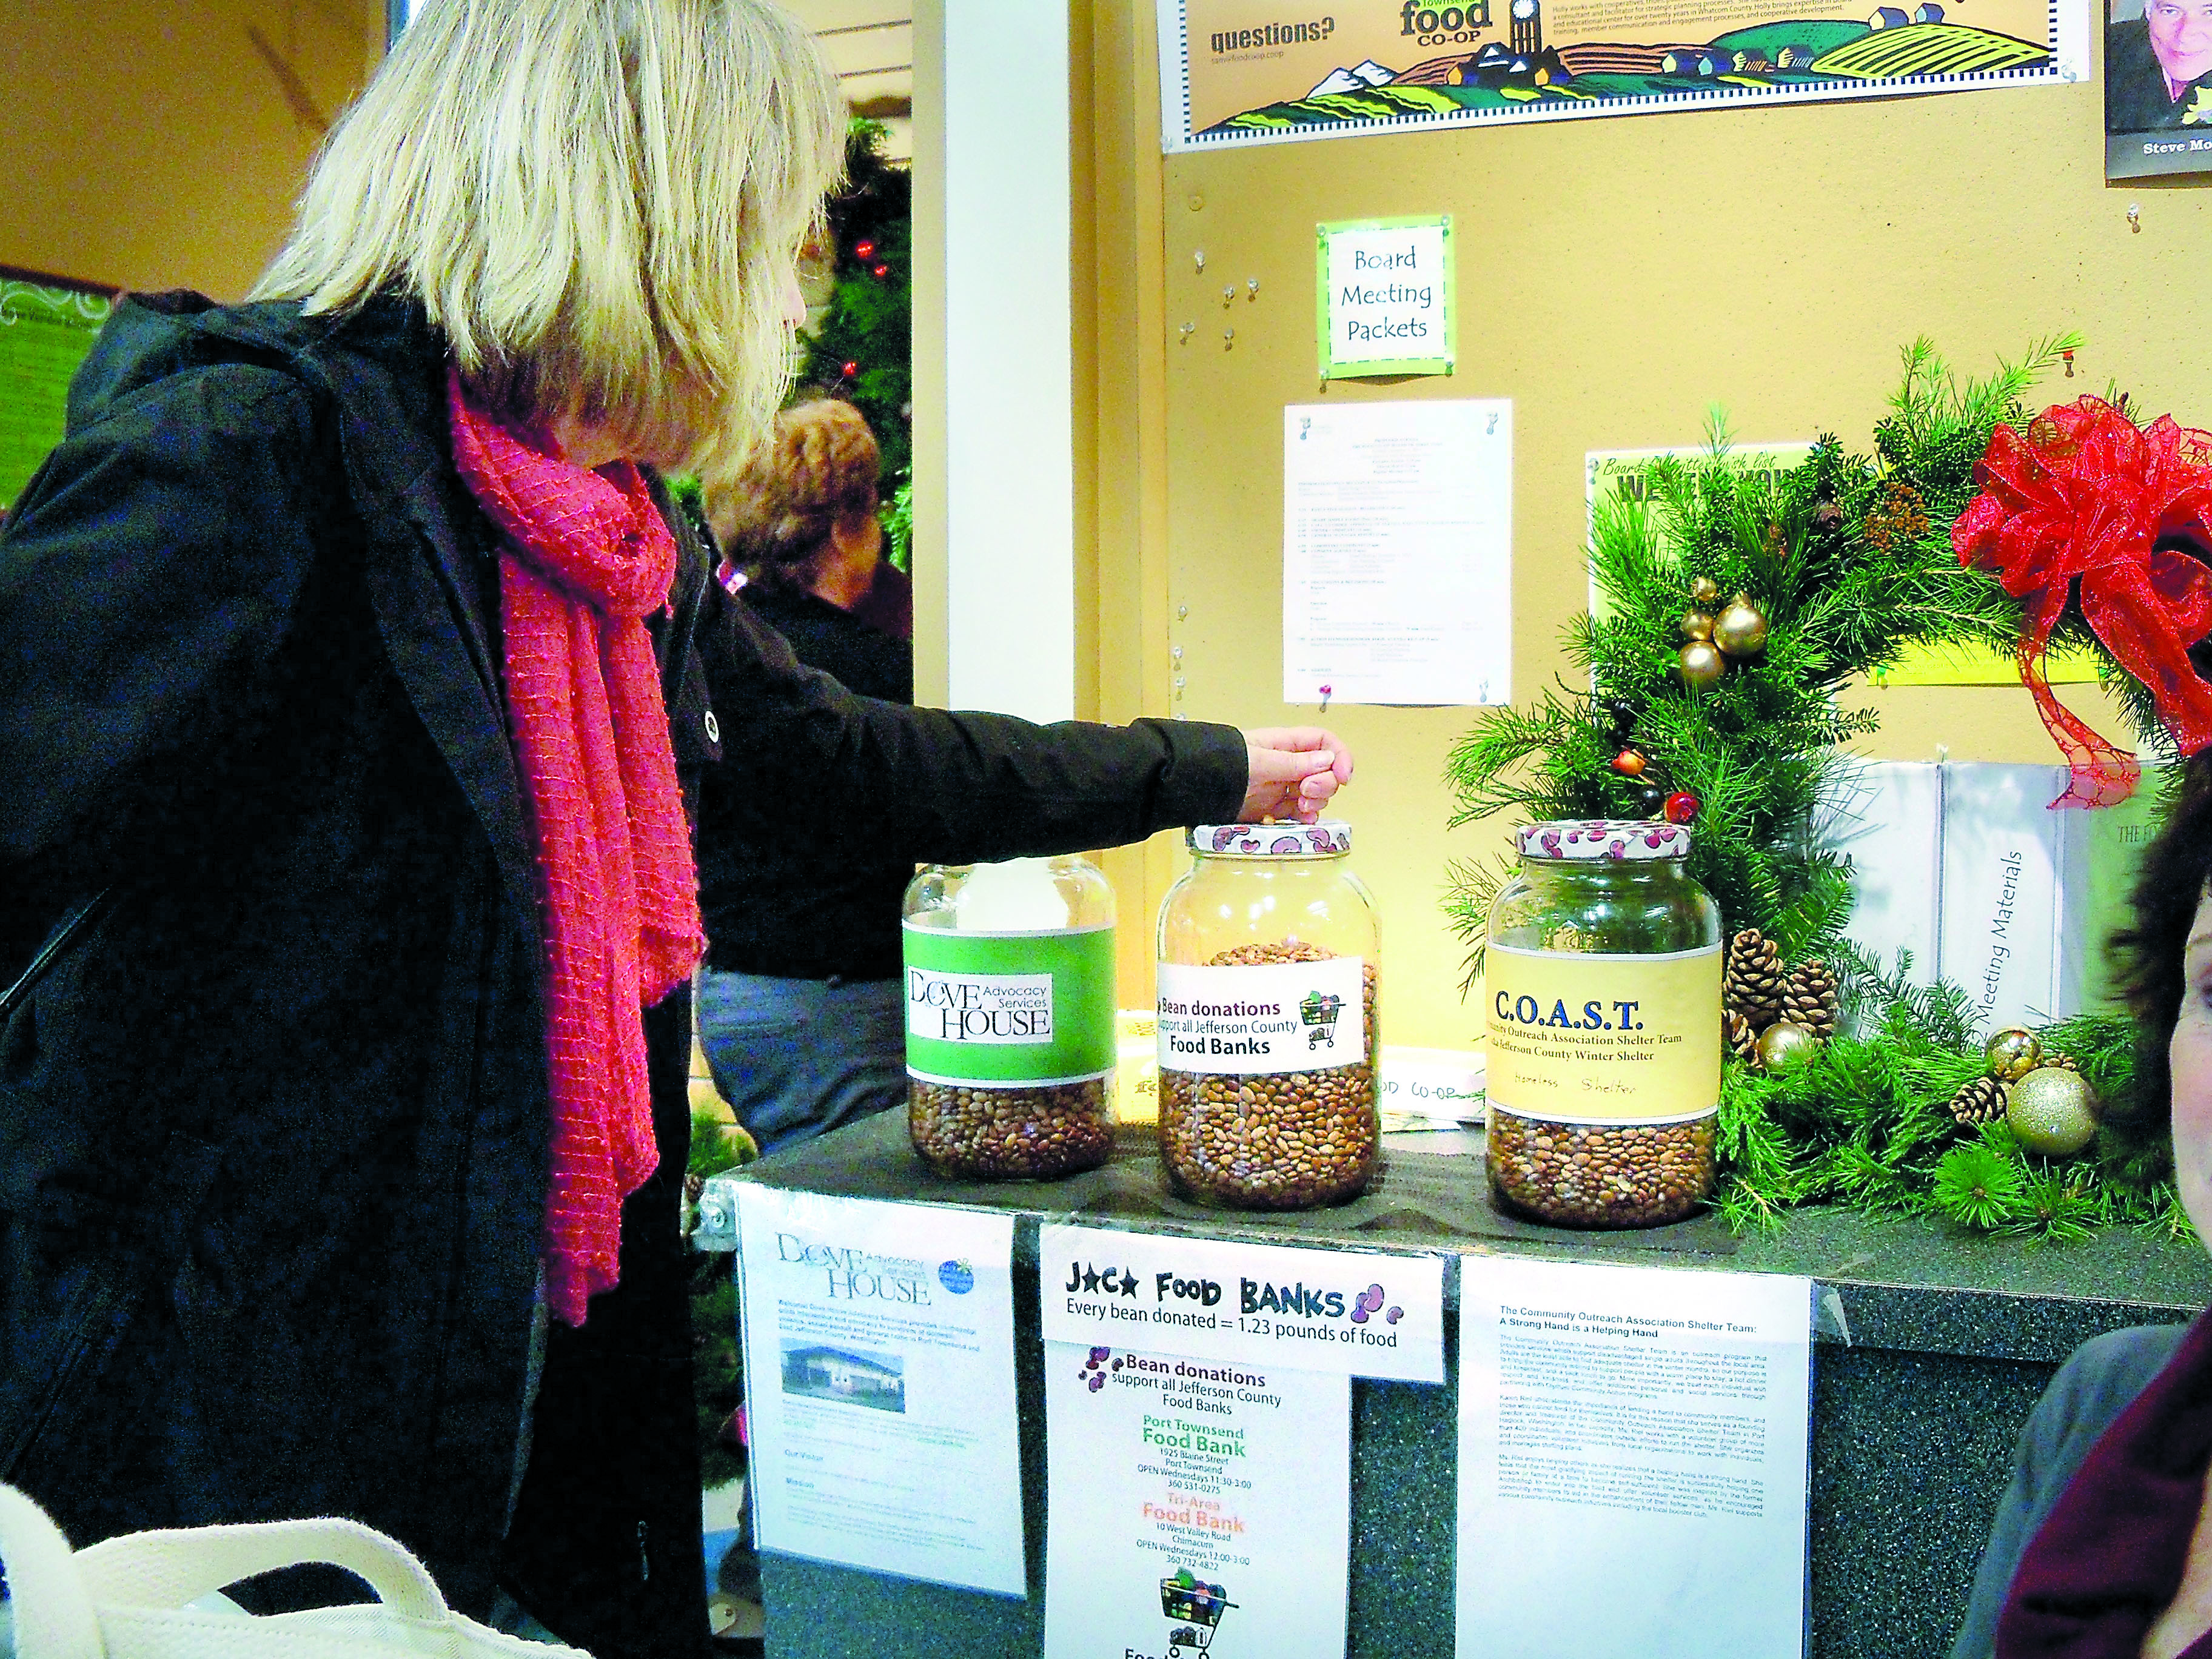 The Port Townsend Food Co-op's “Beans for Bags” program lets members who bring in reusable bags for their groceries choose from a 5-cent refund or a bean worth 5 cents that they can drop in their choice of glass gallon jars designated for three local nonprofit organizations.